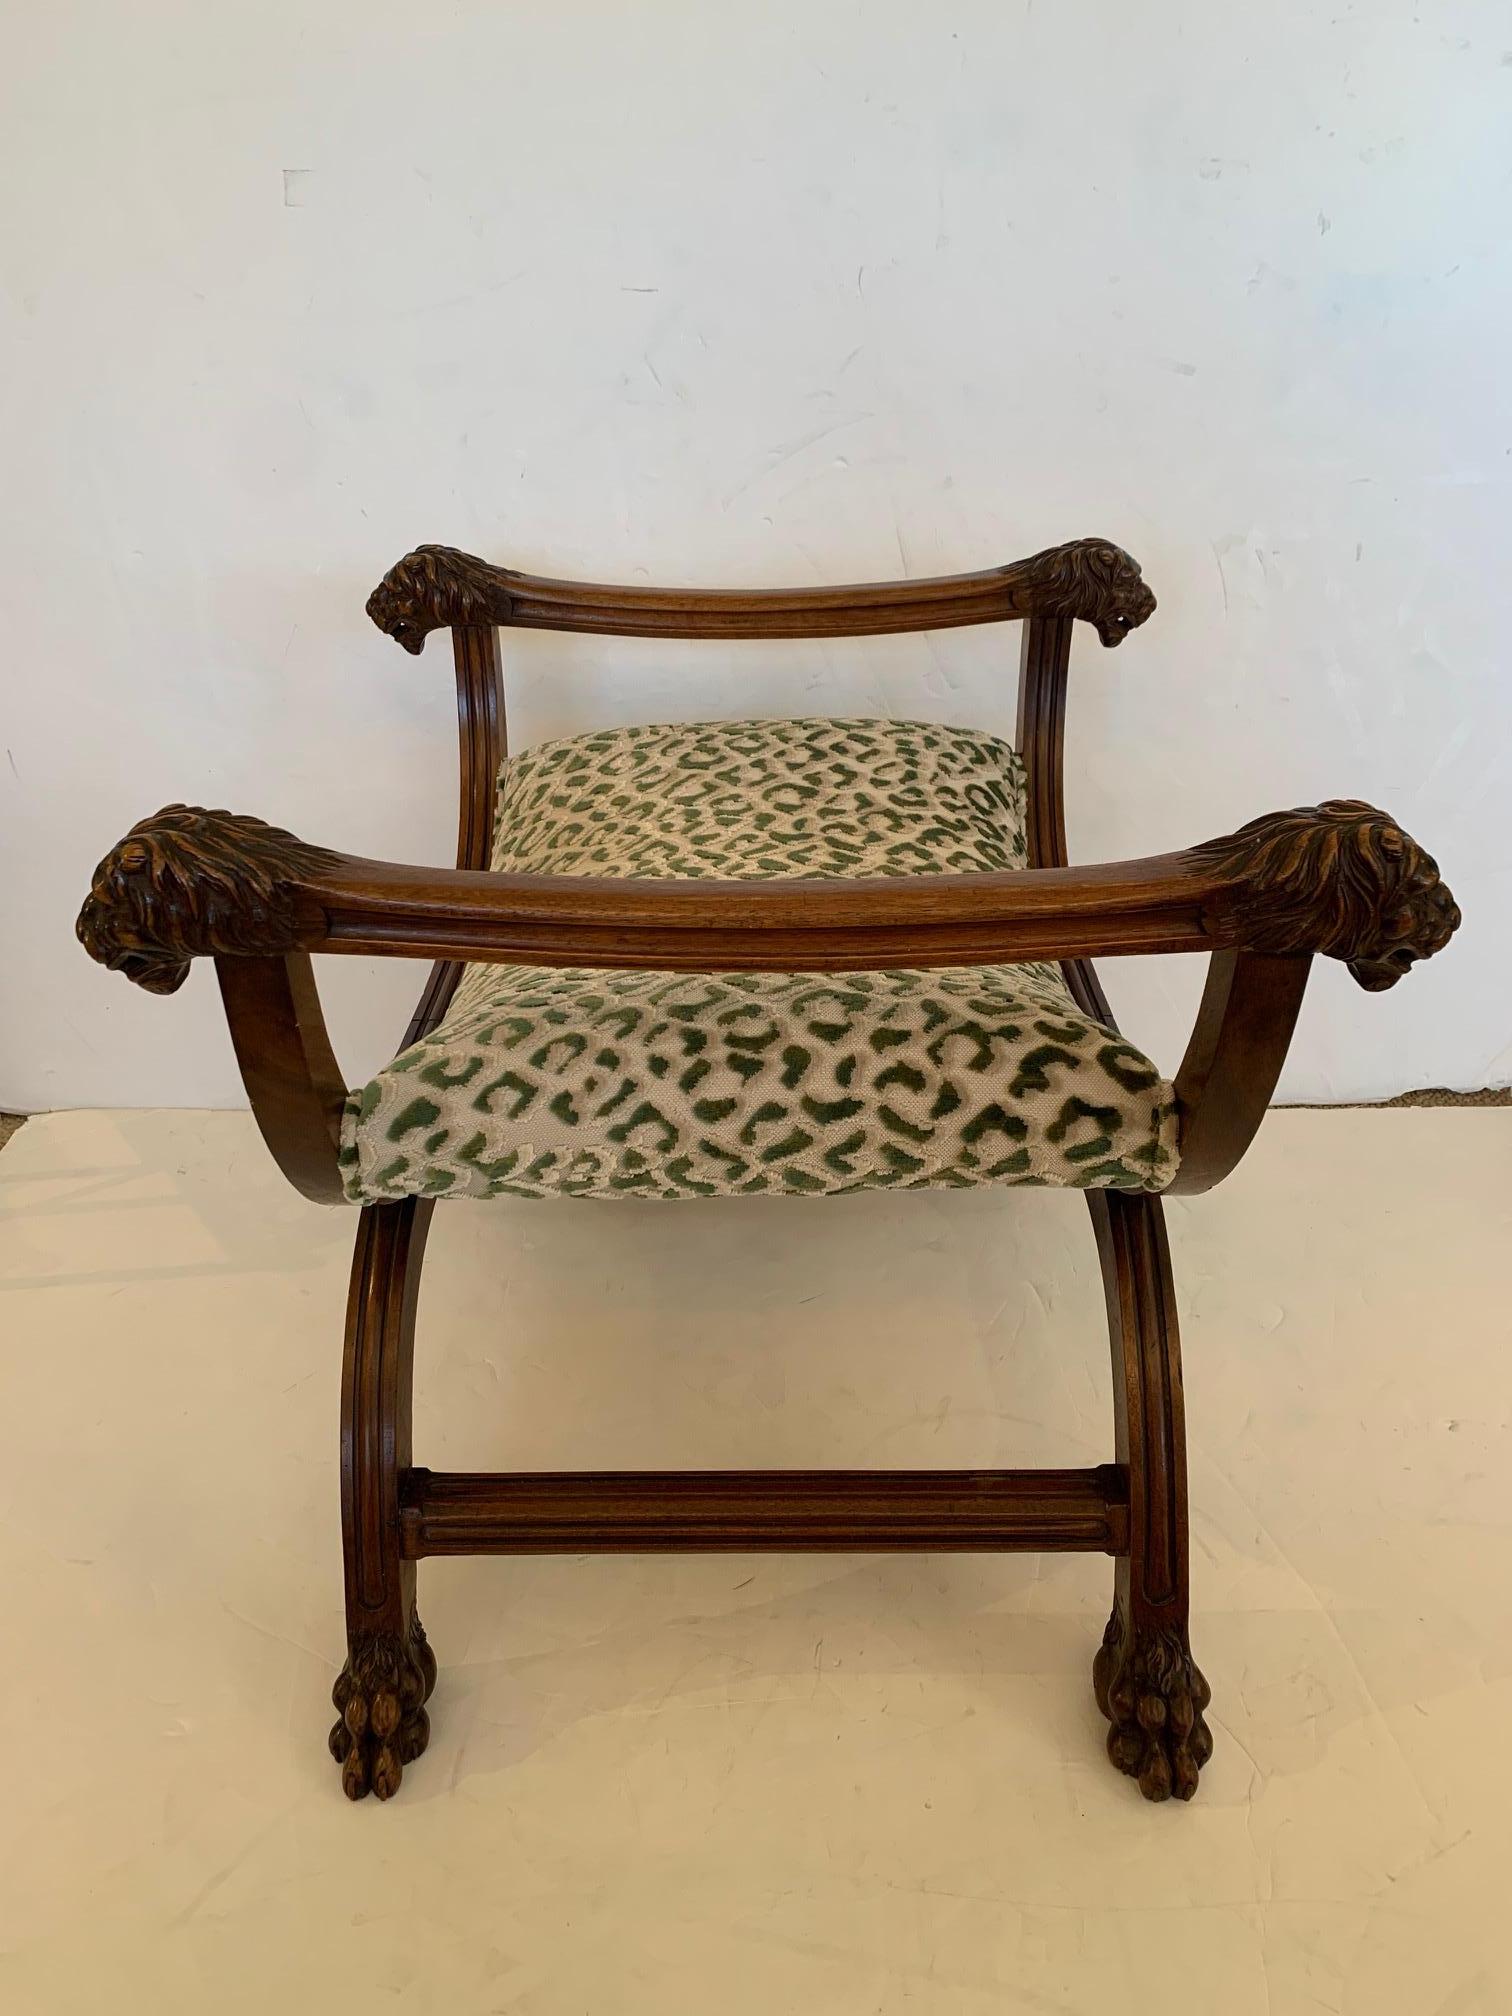 A handsome curved carved walnut bench having marvelous Griffin heads on the side handles and animal paw feet. Upholstery on the seat is an updated cut velvet green and cream animal print.